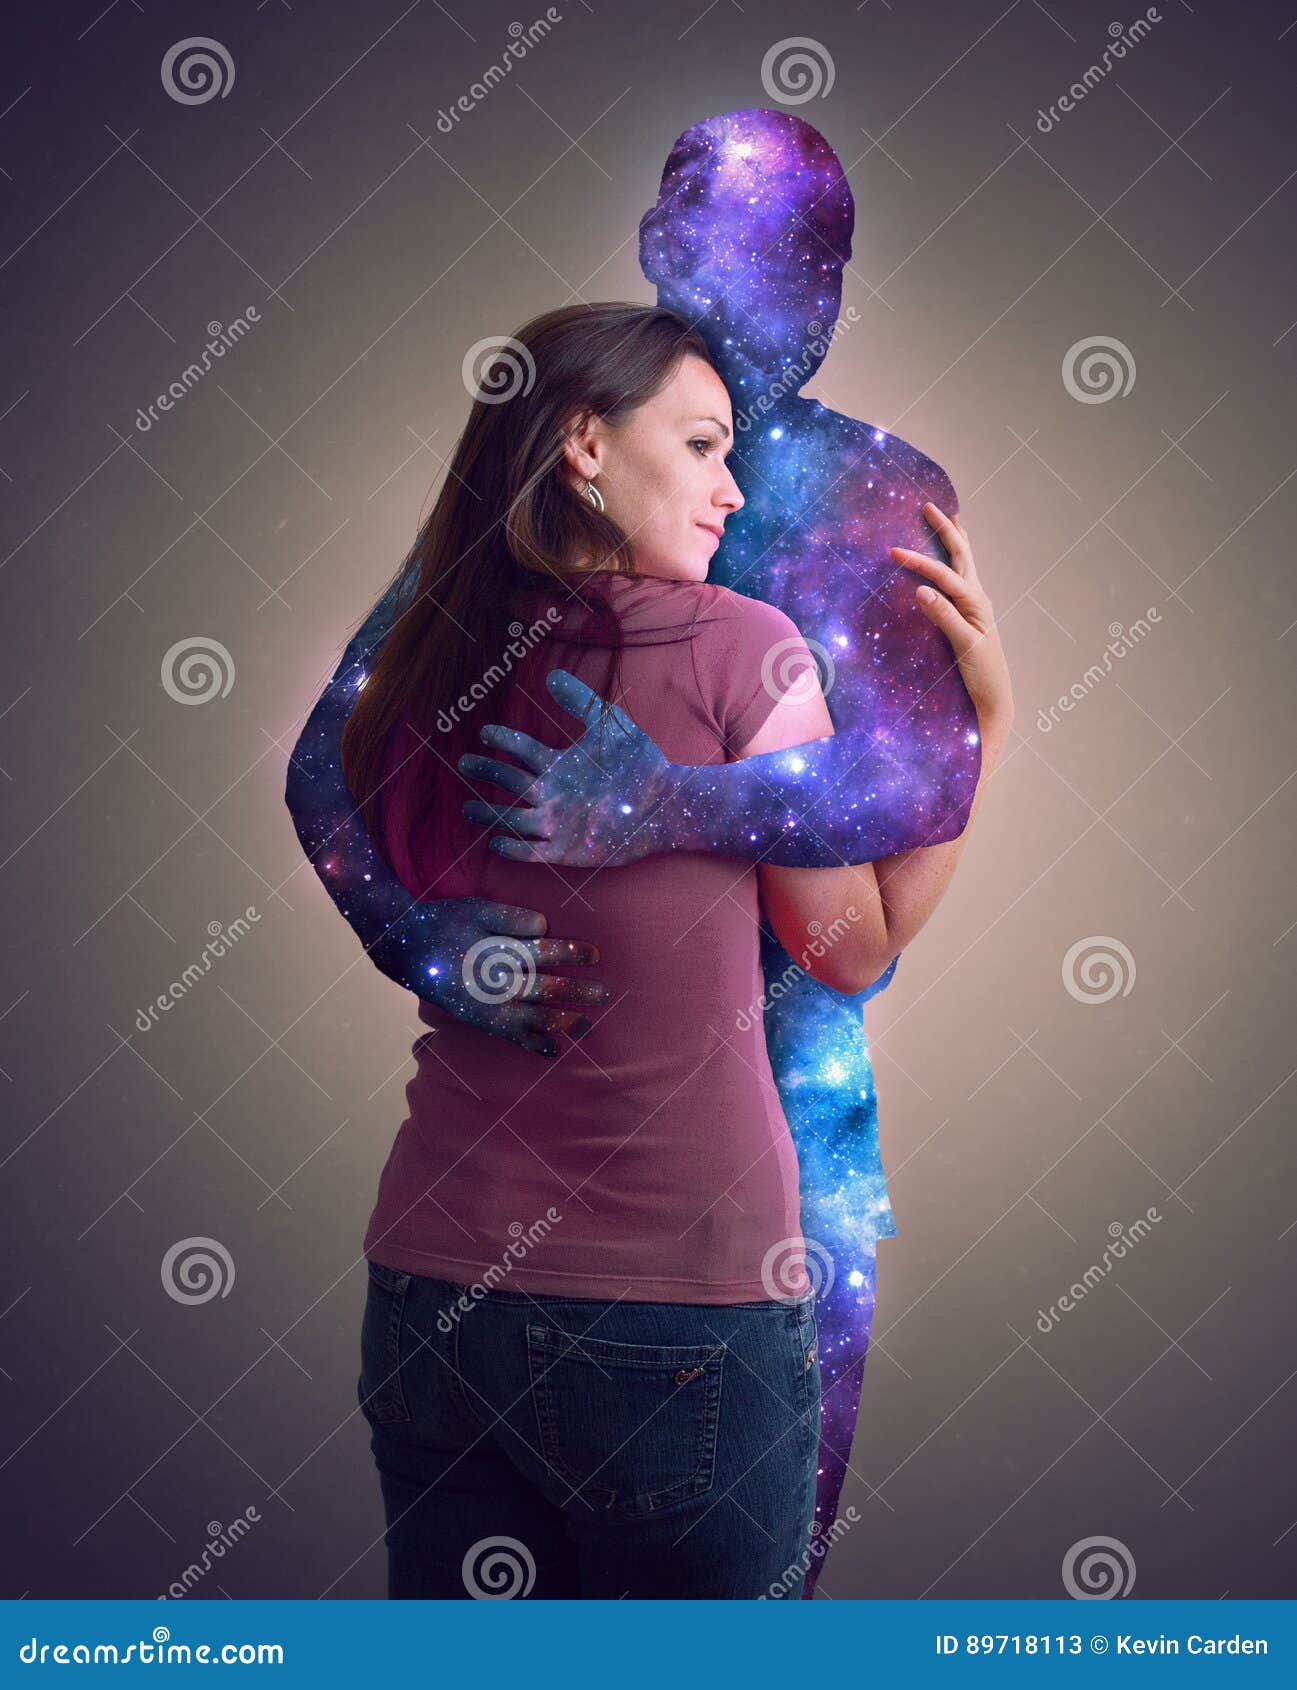 hugging the universe